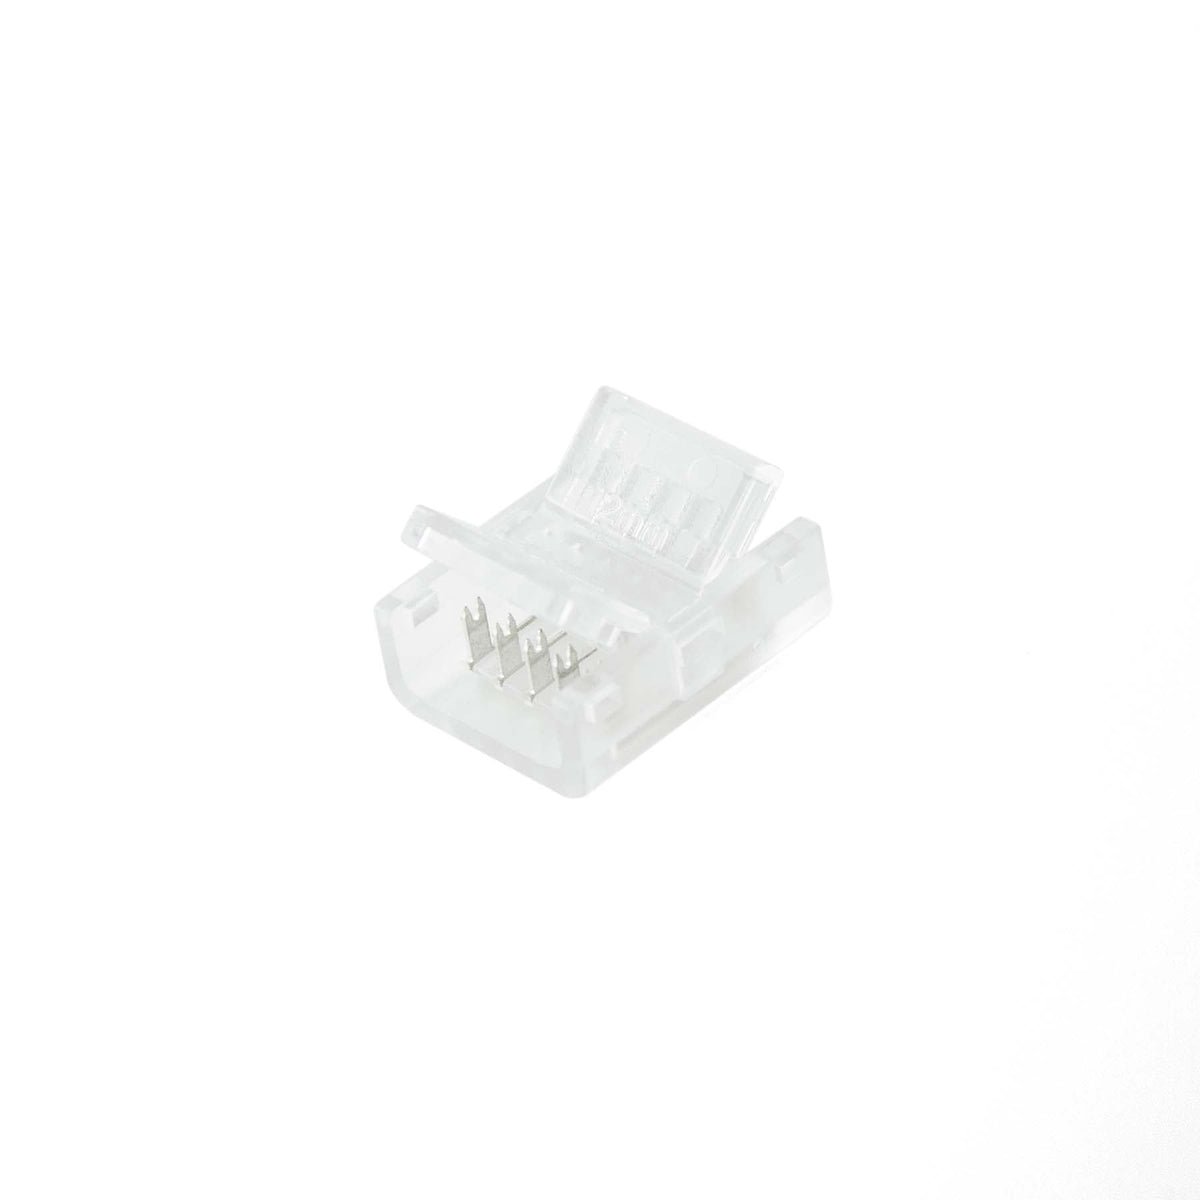 G.W.S LED Wholesale Strip Connectors 5 Pin Straight Connector For RGBW/RGBWW LED Strip Lights